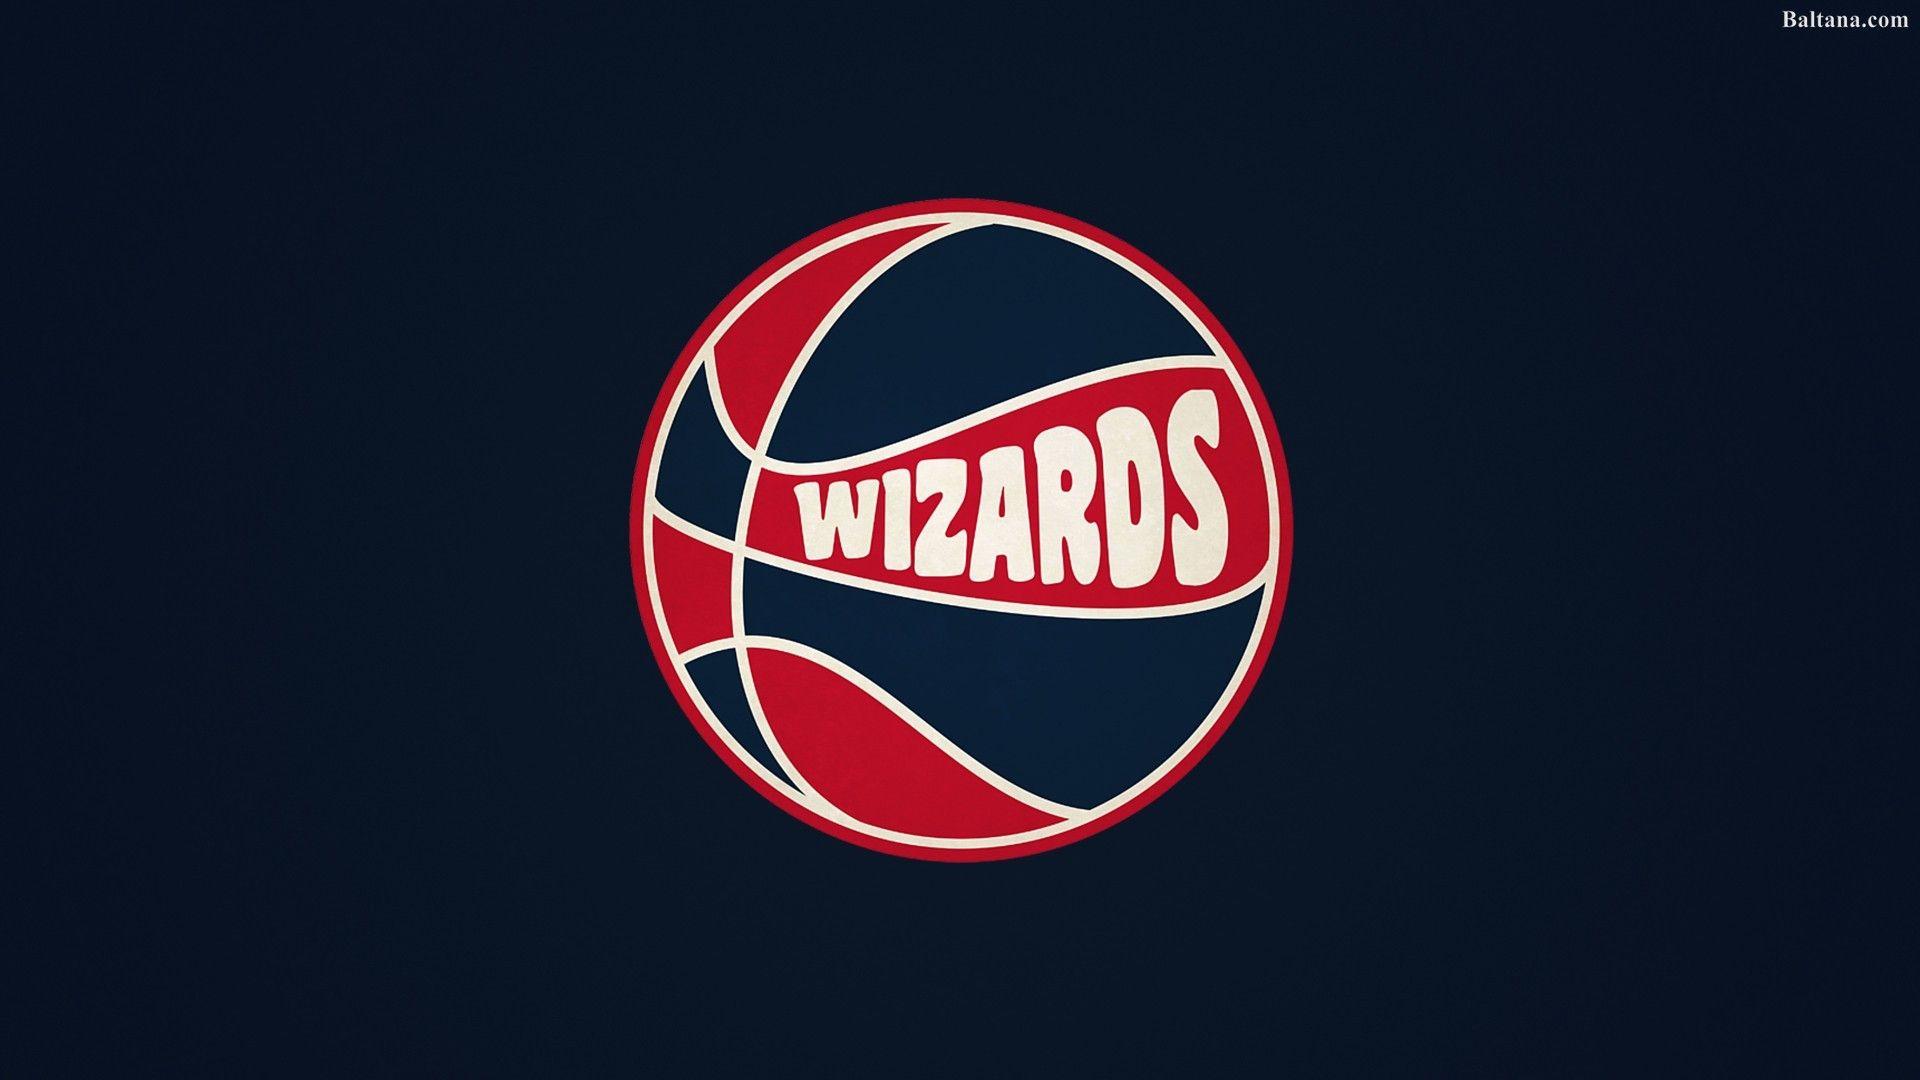 Washington Wizards on Twitter  wallpapers  RepTheDistrict   WallpaperWednesday httpstcoQbHmiVWCPg  Twitter